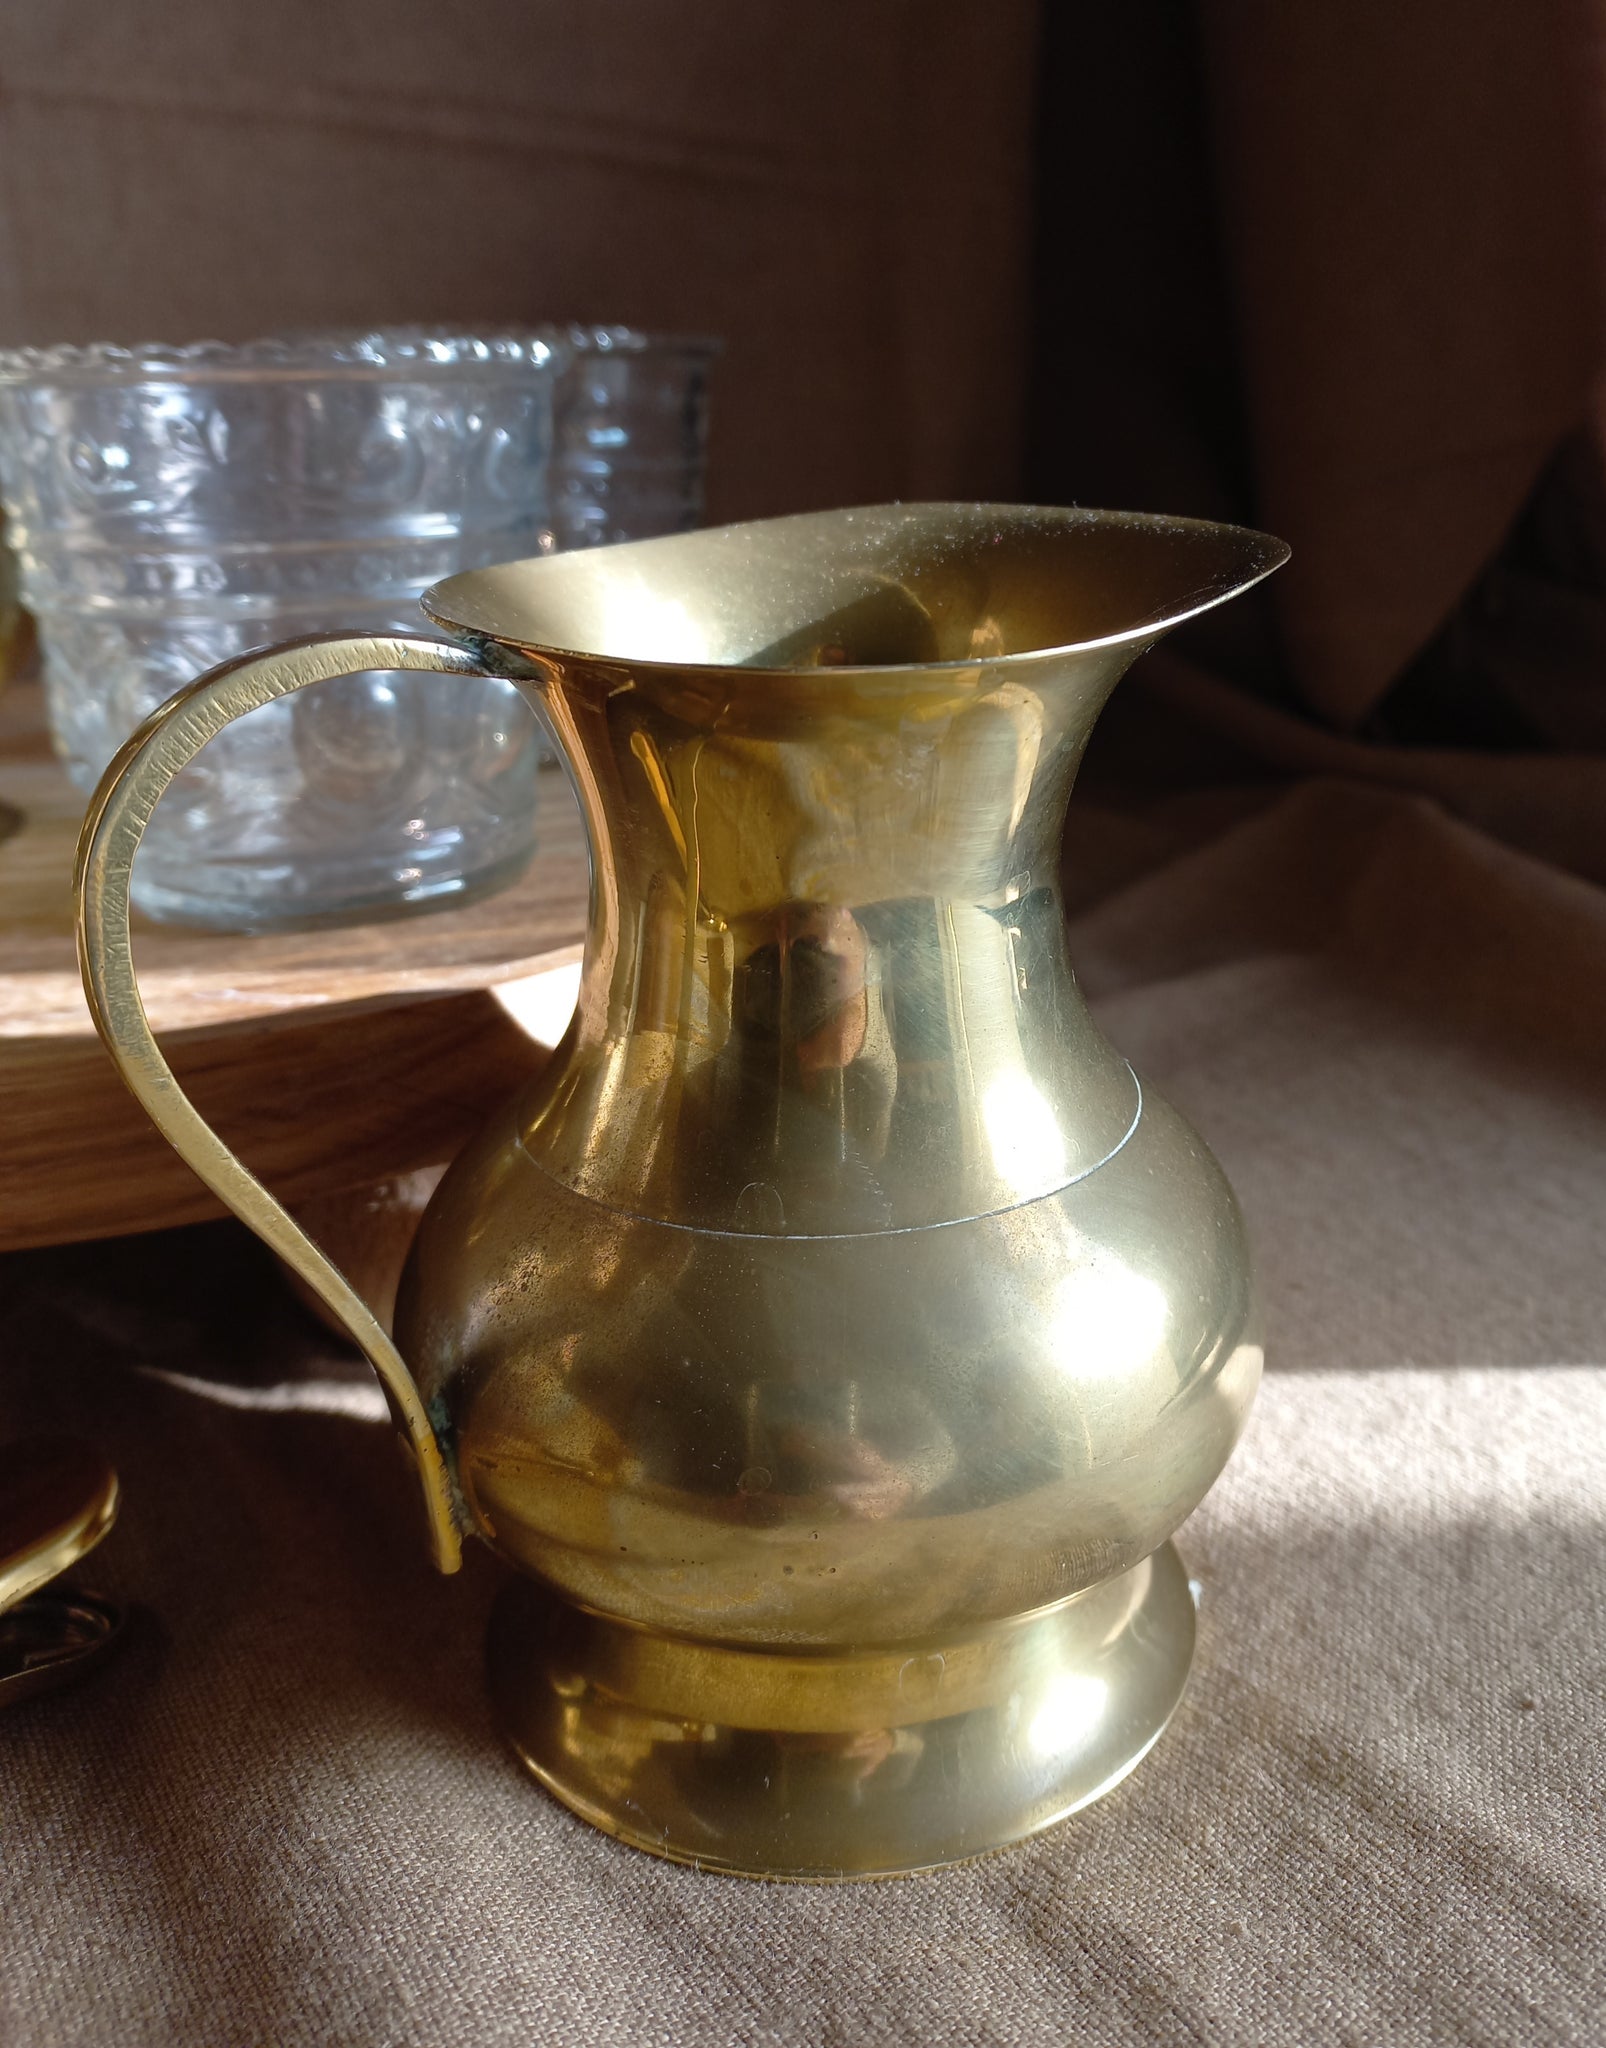 Vintage Solid Brass Pitcher Made in India Patina Brass Metal